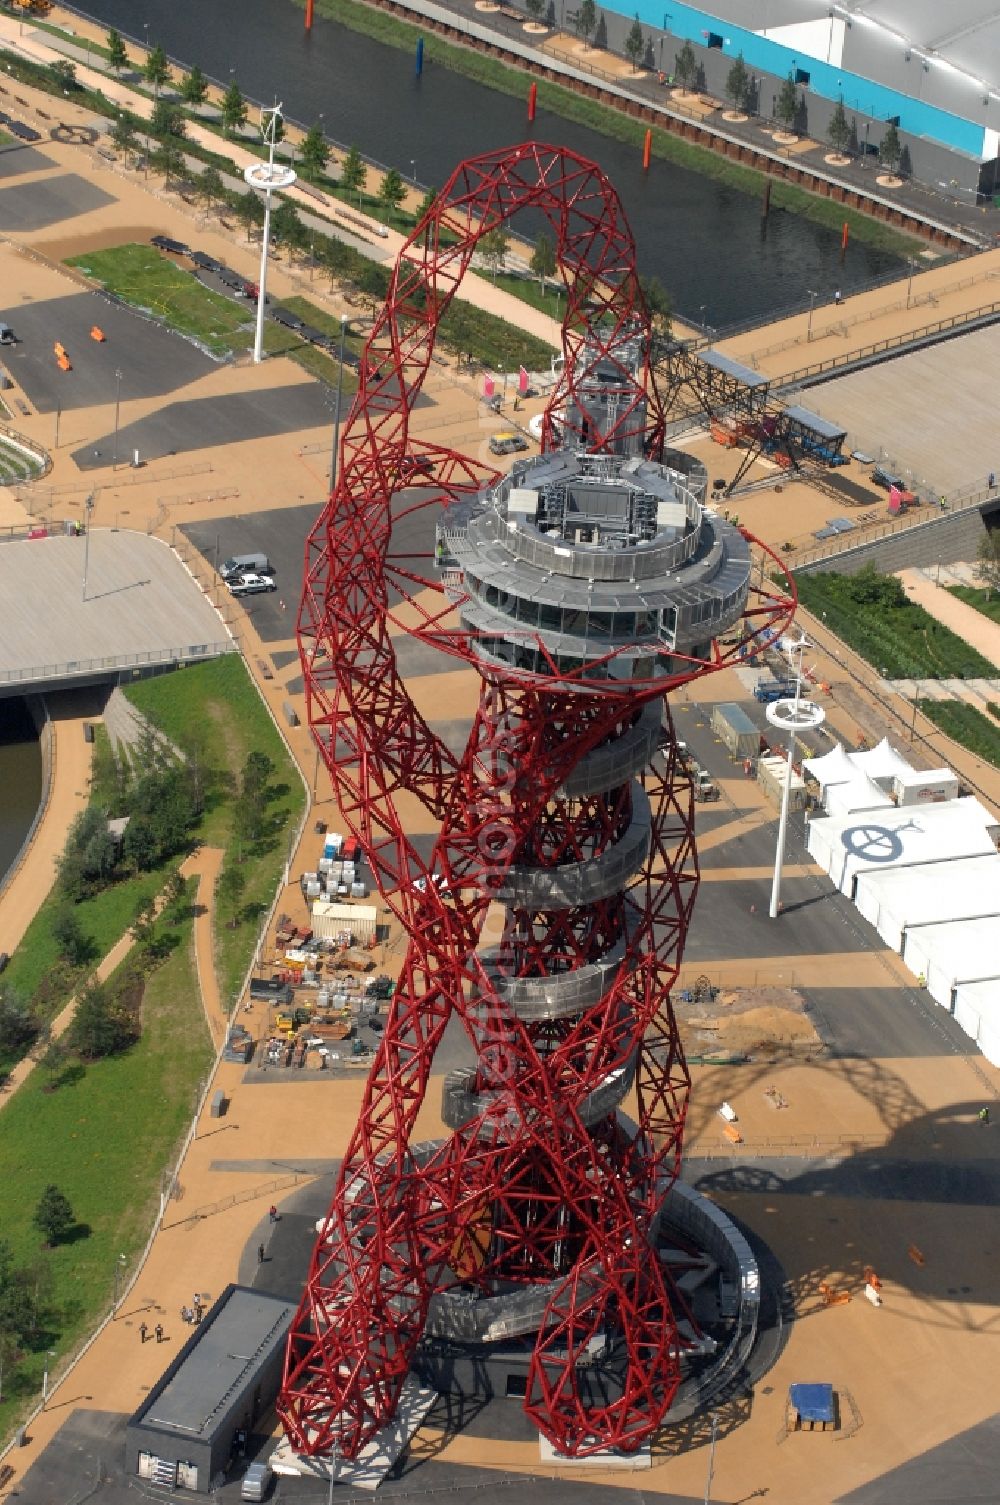 Aerial photograph London - The ArcelorMittal Orbit is a 115-metre-high ( 377 ft ) observation tower in the Olympic Park in Stratford, London and is intended to be a permanent, lasting legacy of the Olympic and Paralympic Games 2012 in Great Britain